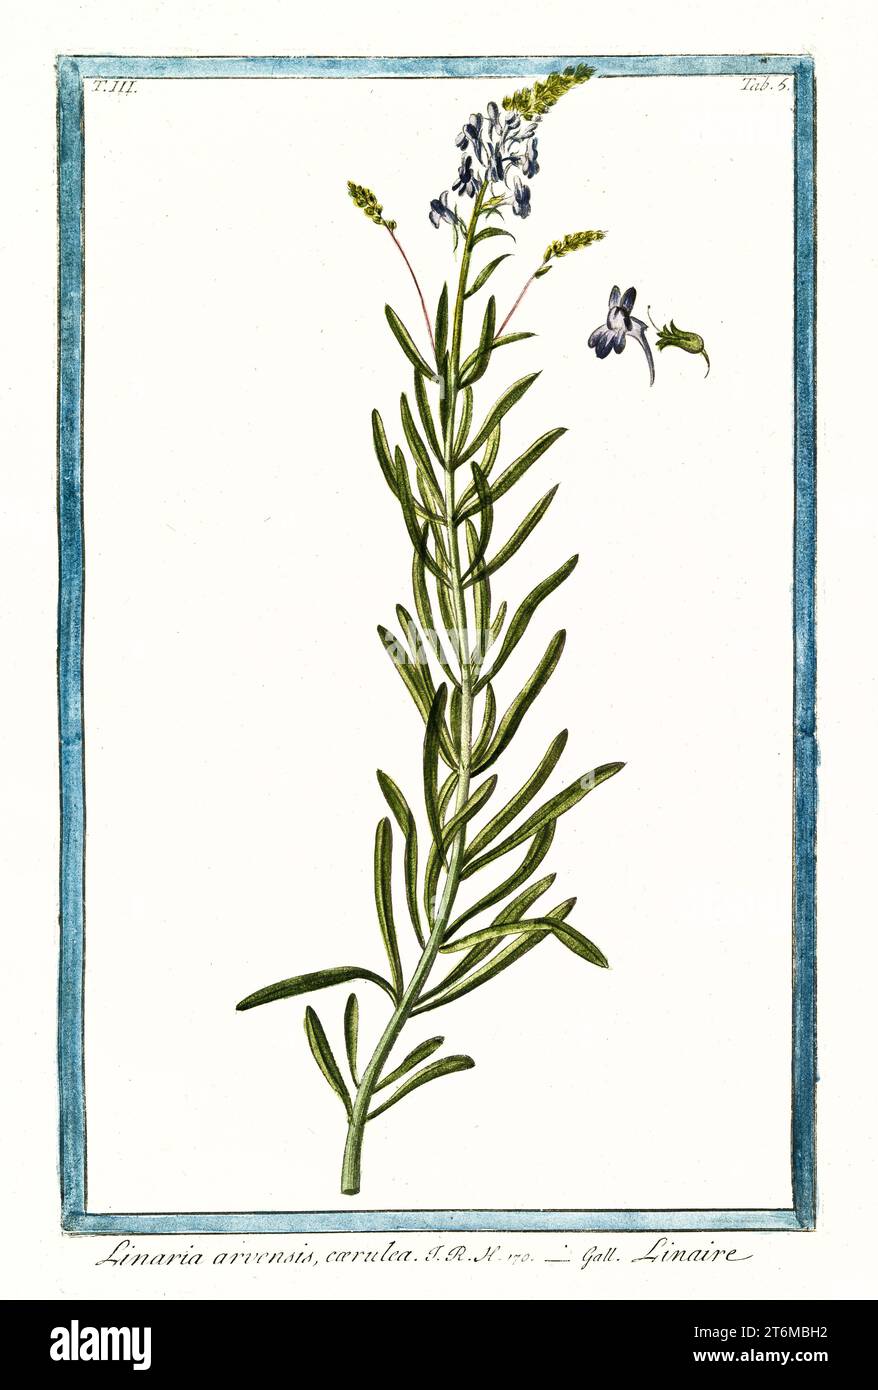 Old illustration of Blue Corn Toadflax (Linaria arvensis). By G. Bonelli on Hortus Romanus, publ. N. Martelli, Rome, 1772 – 93 Stock Photo